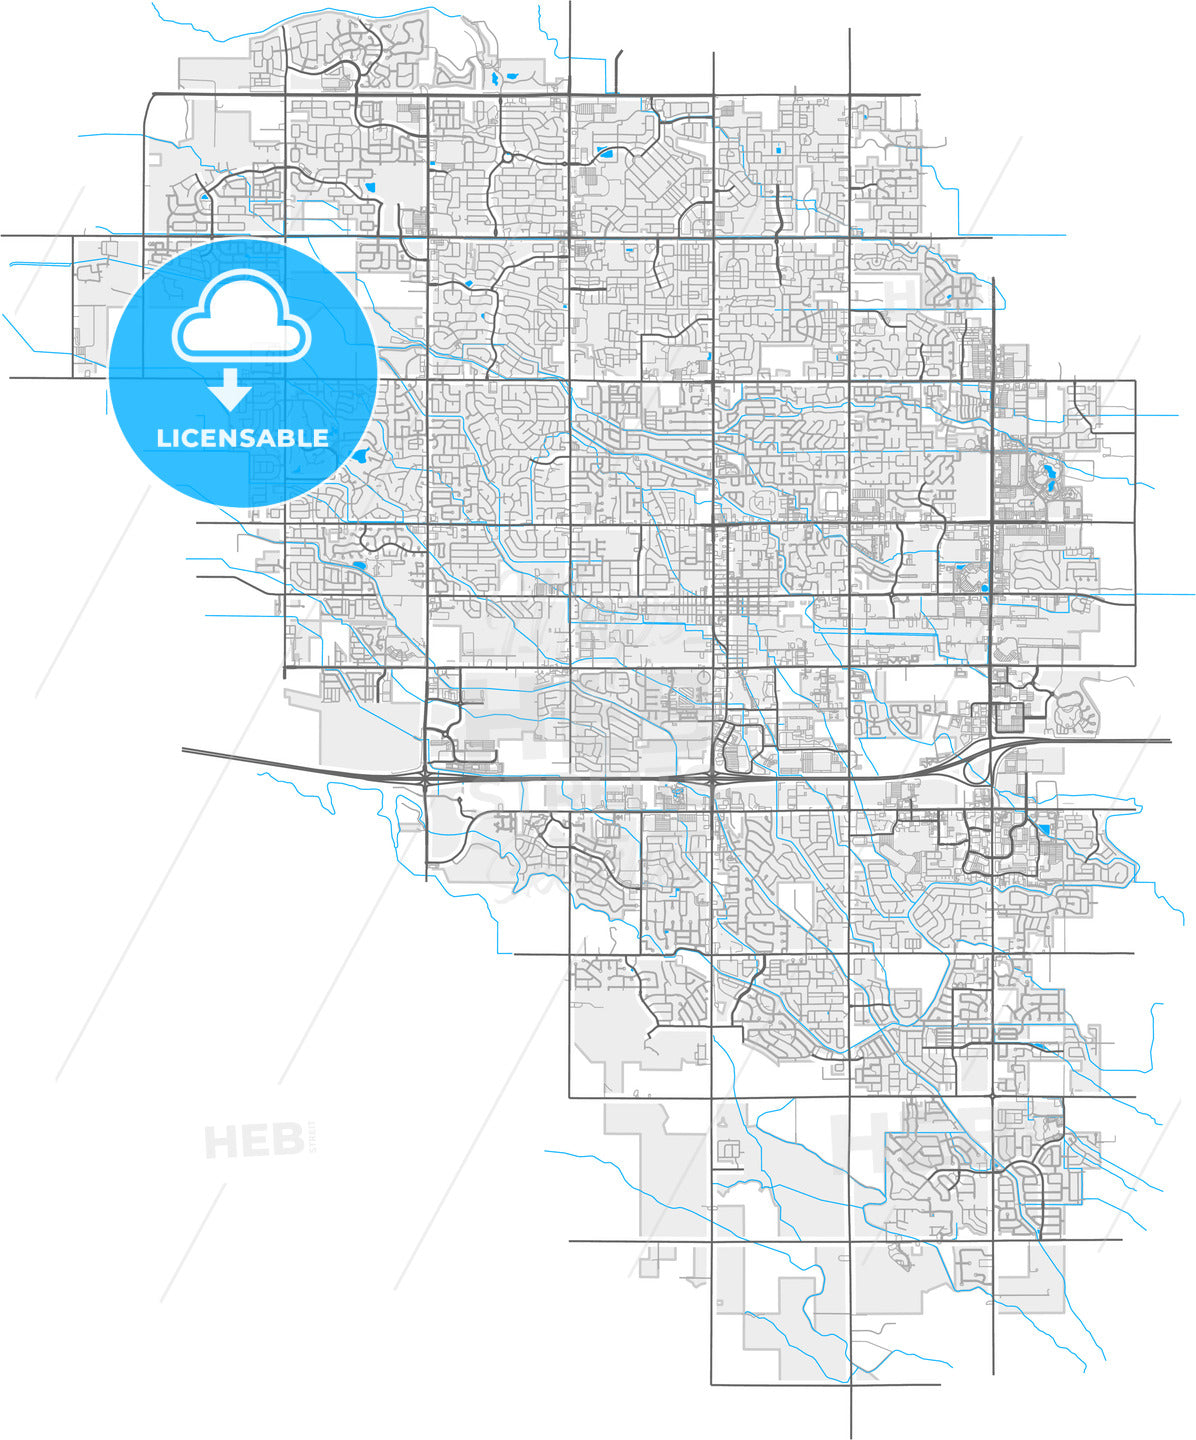 Meridian, Idaho, United States, high quality vector map